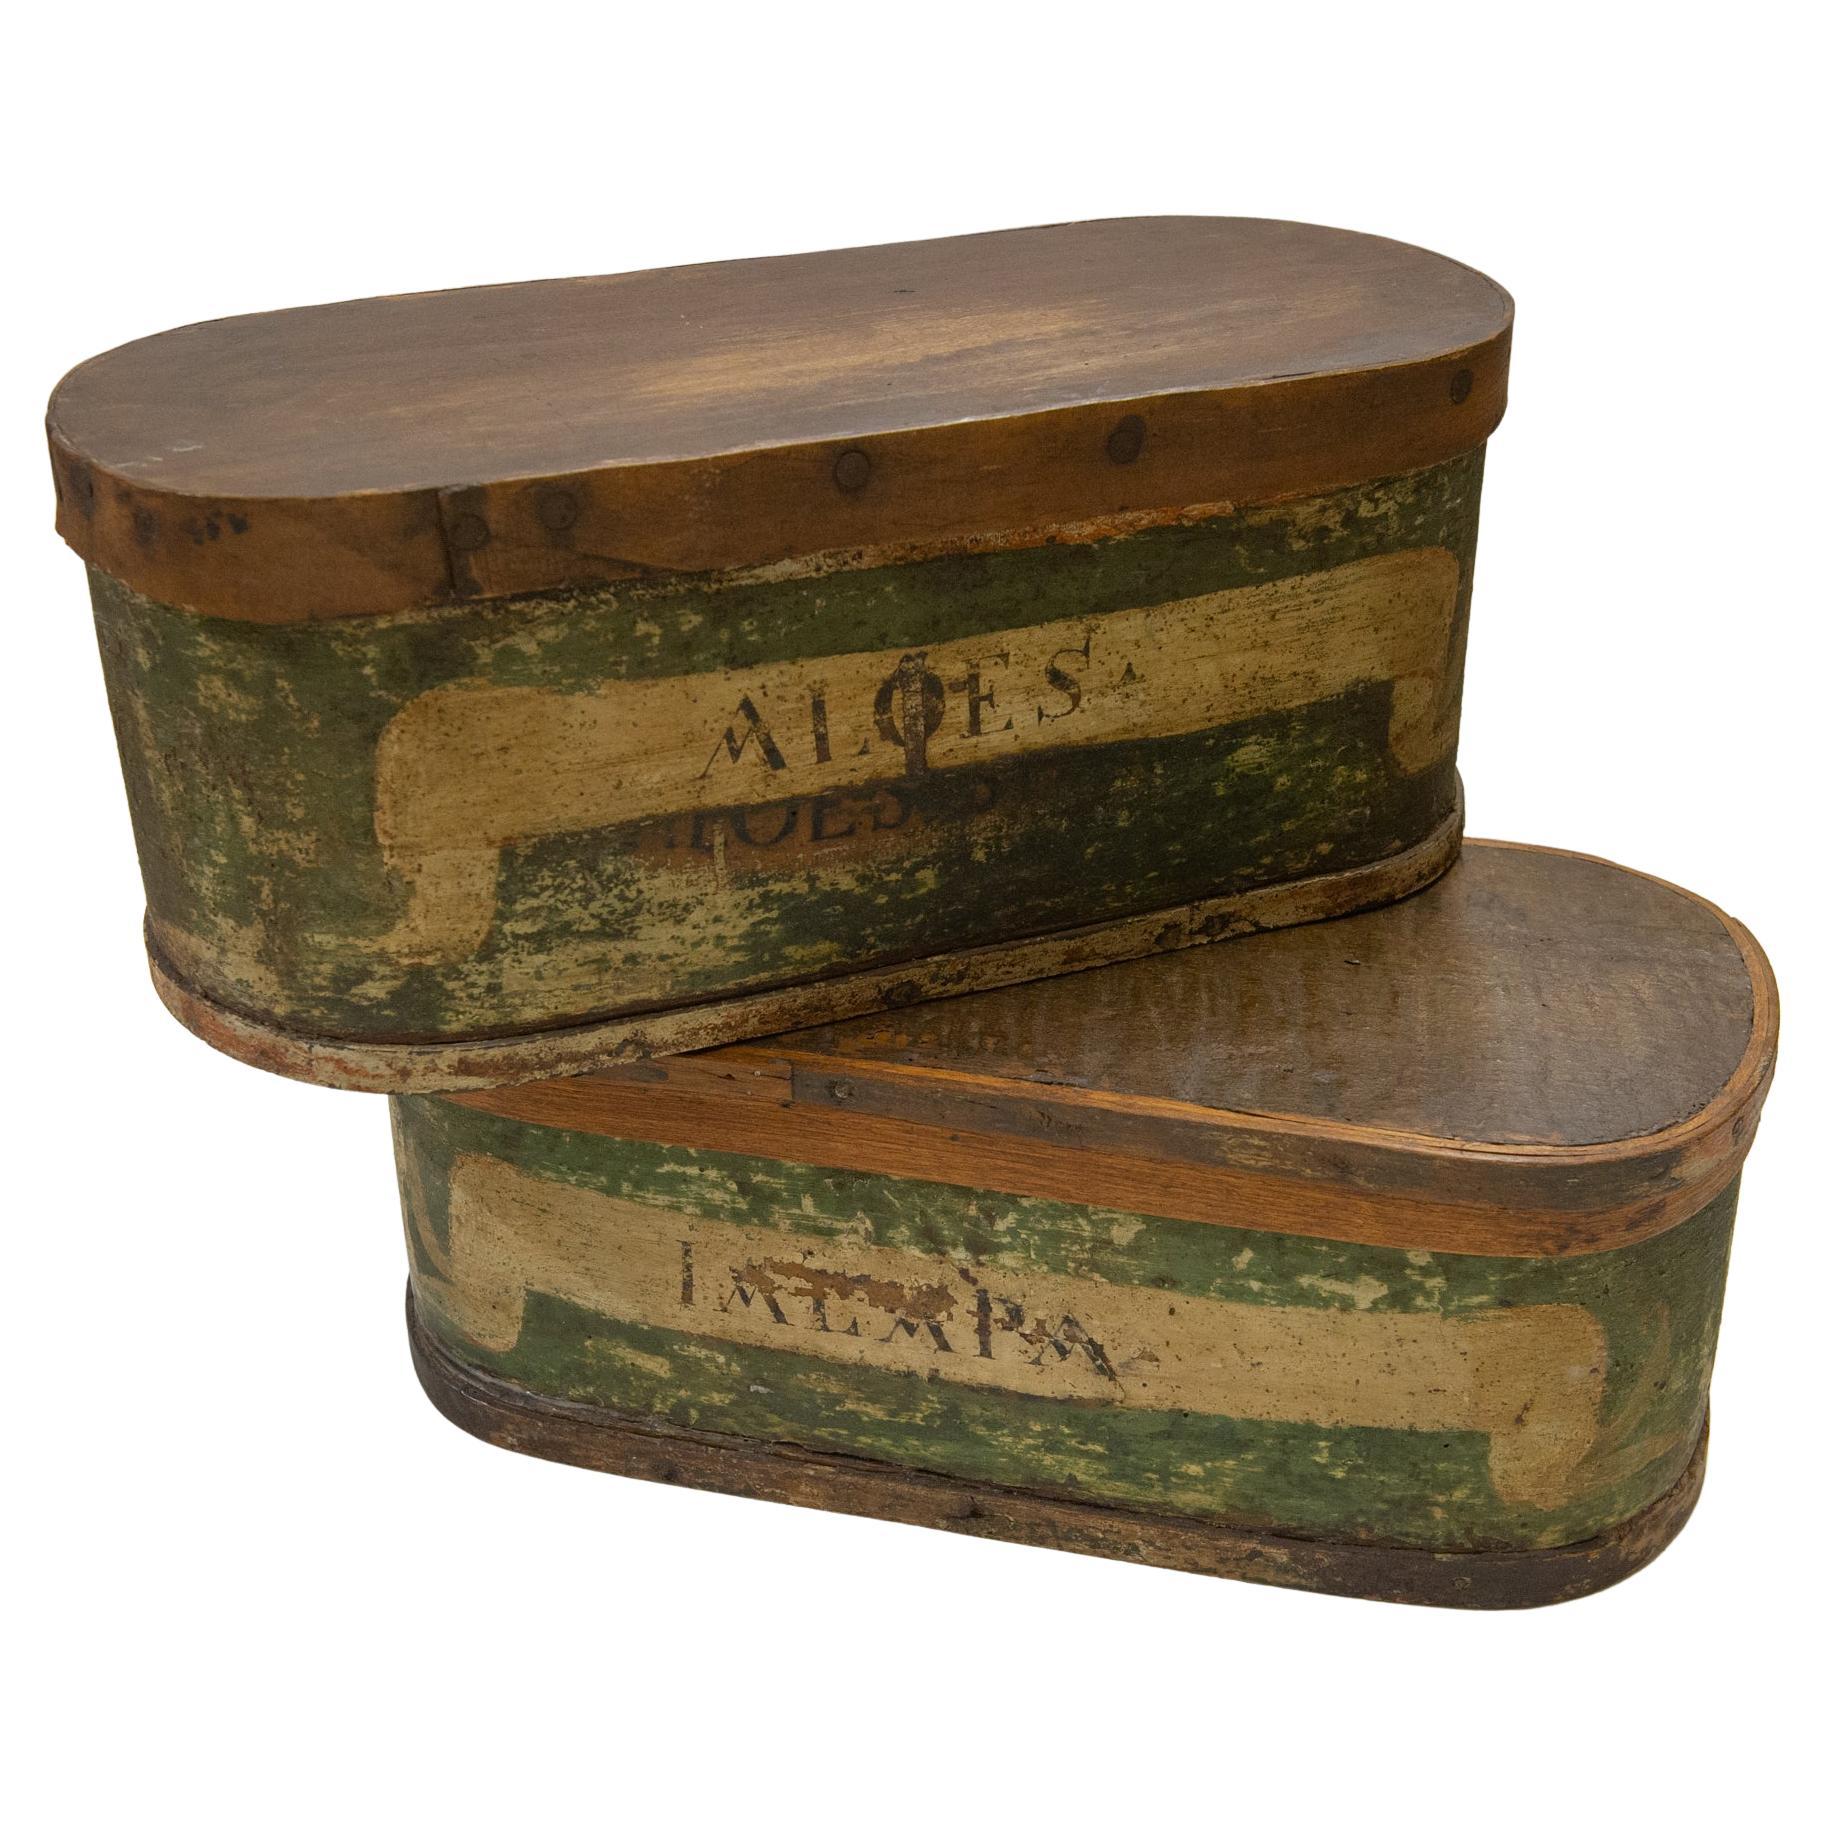 Oval Wooden Apothecary or Pharmacy Pair Boxes